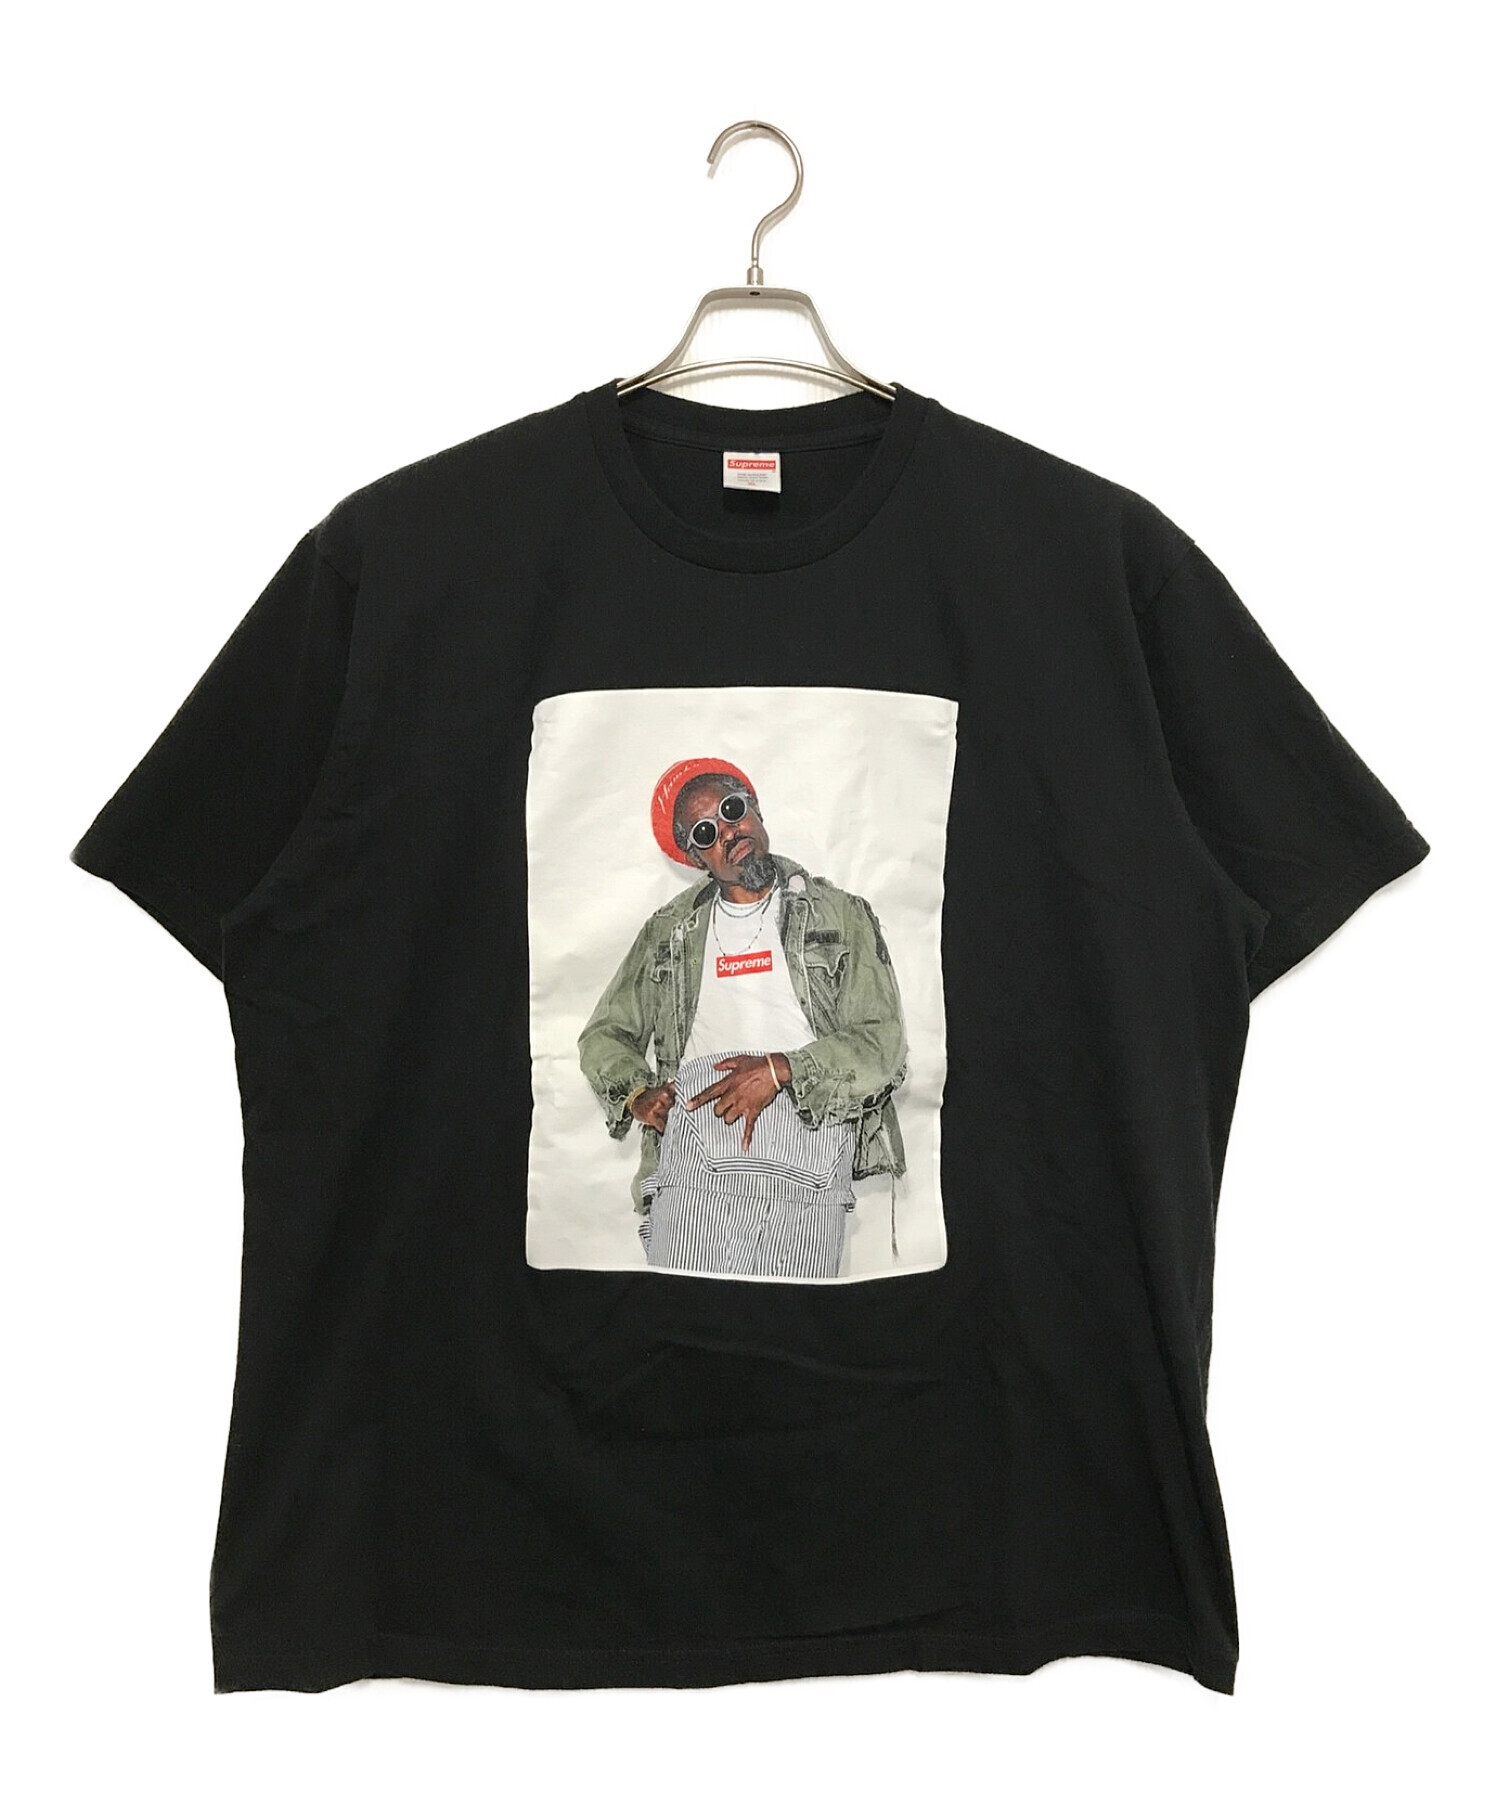 Tシャツ/カットソー(半袖/袖なし)Supreme Andre 3000 Tee XL